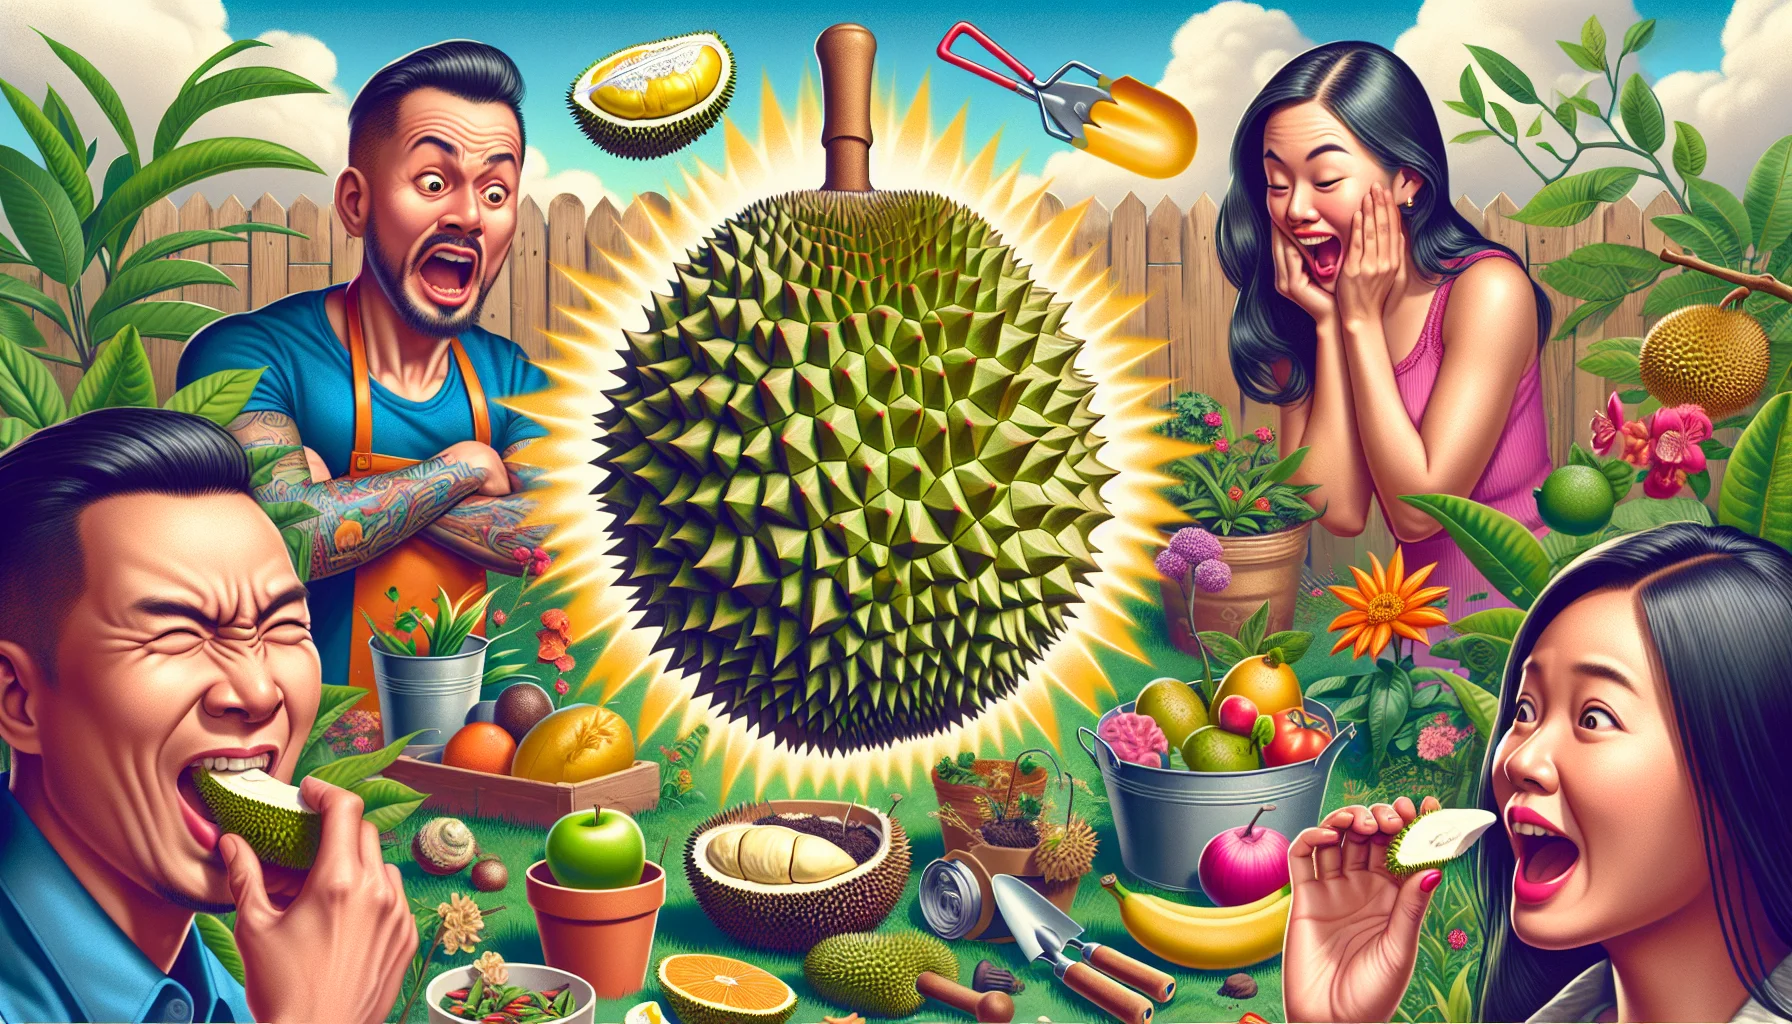 Generate a humor-filled, detailed image showcasing the unique flavor profile of a durian. Display an array of human reactions to its taste - a hesitant Caucasian man wrestling with its smell, a happy Hispanic woman savoring the flavor, and a South Asian child who is surprised at the initial taste. Additionally, portray encouraging gardening elements like a variety of lush plants, colorful fruits and vegetables, gardening tools, and a sunny backdrop. The overall scene should emanate joy, playfulness, and the pleasure of home-gardening.